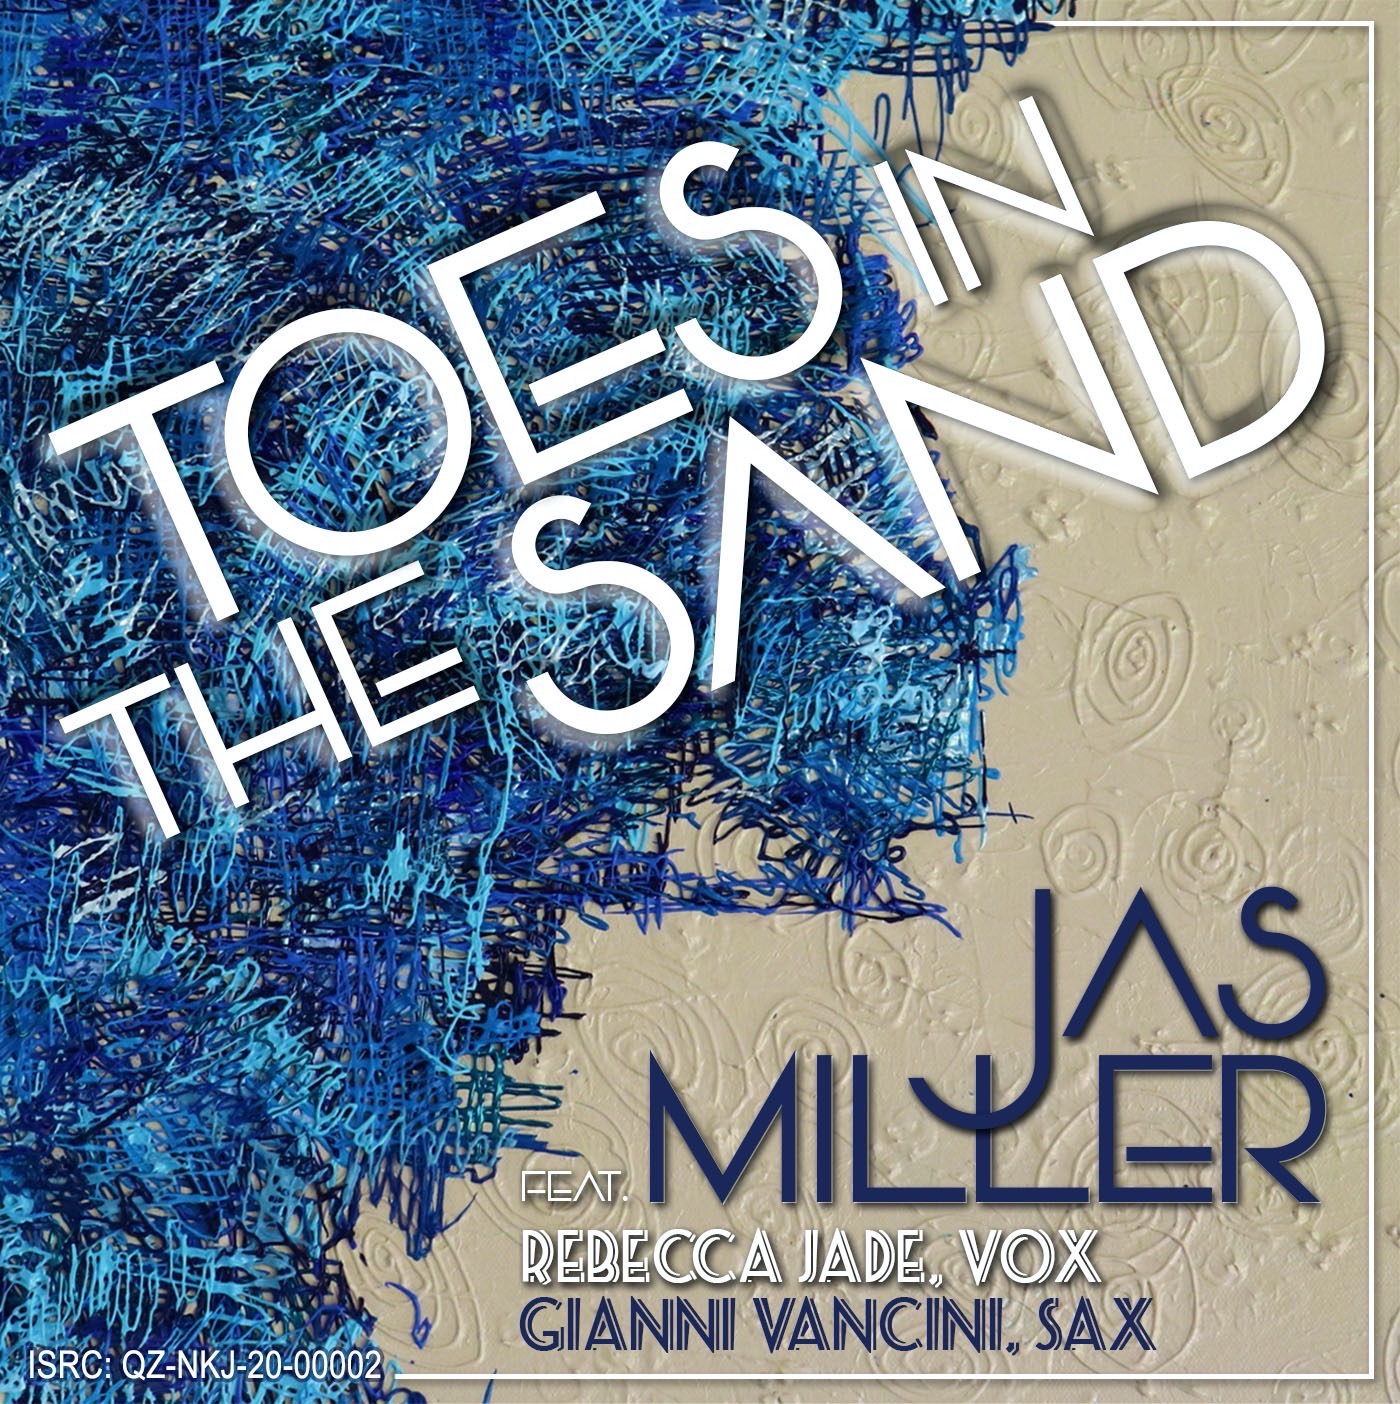 Art for TOES IN THE SAND by Jas Miller